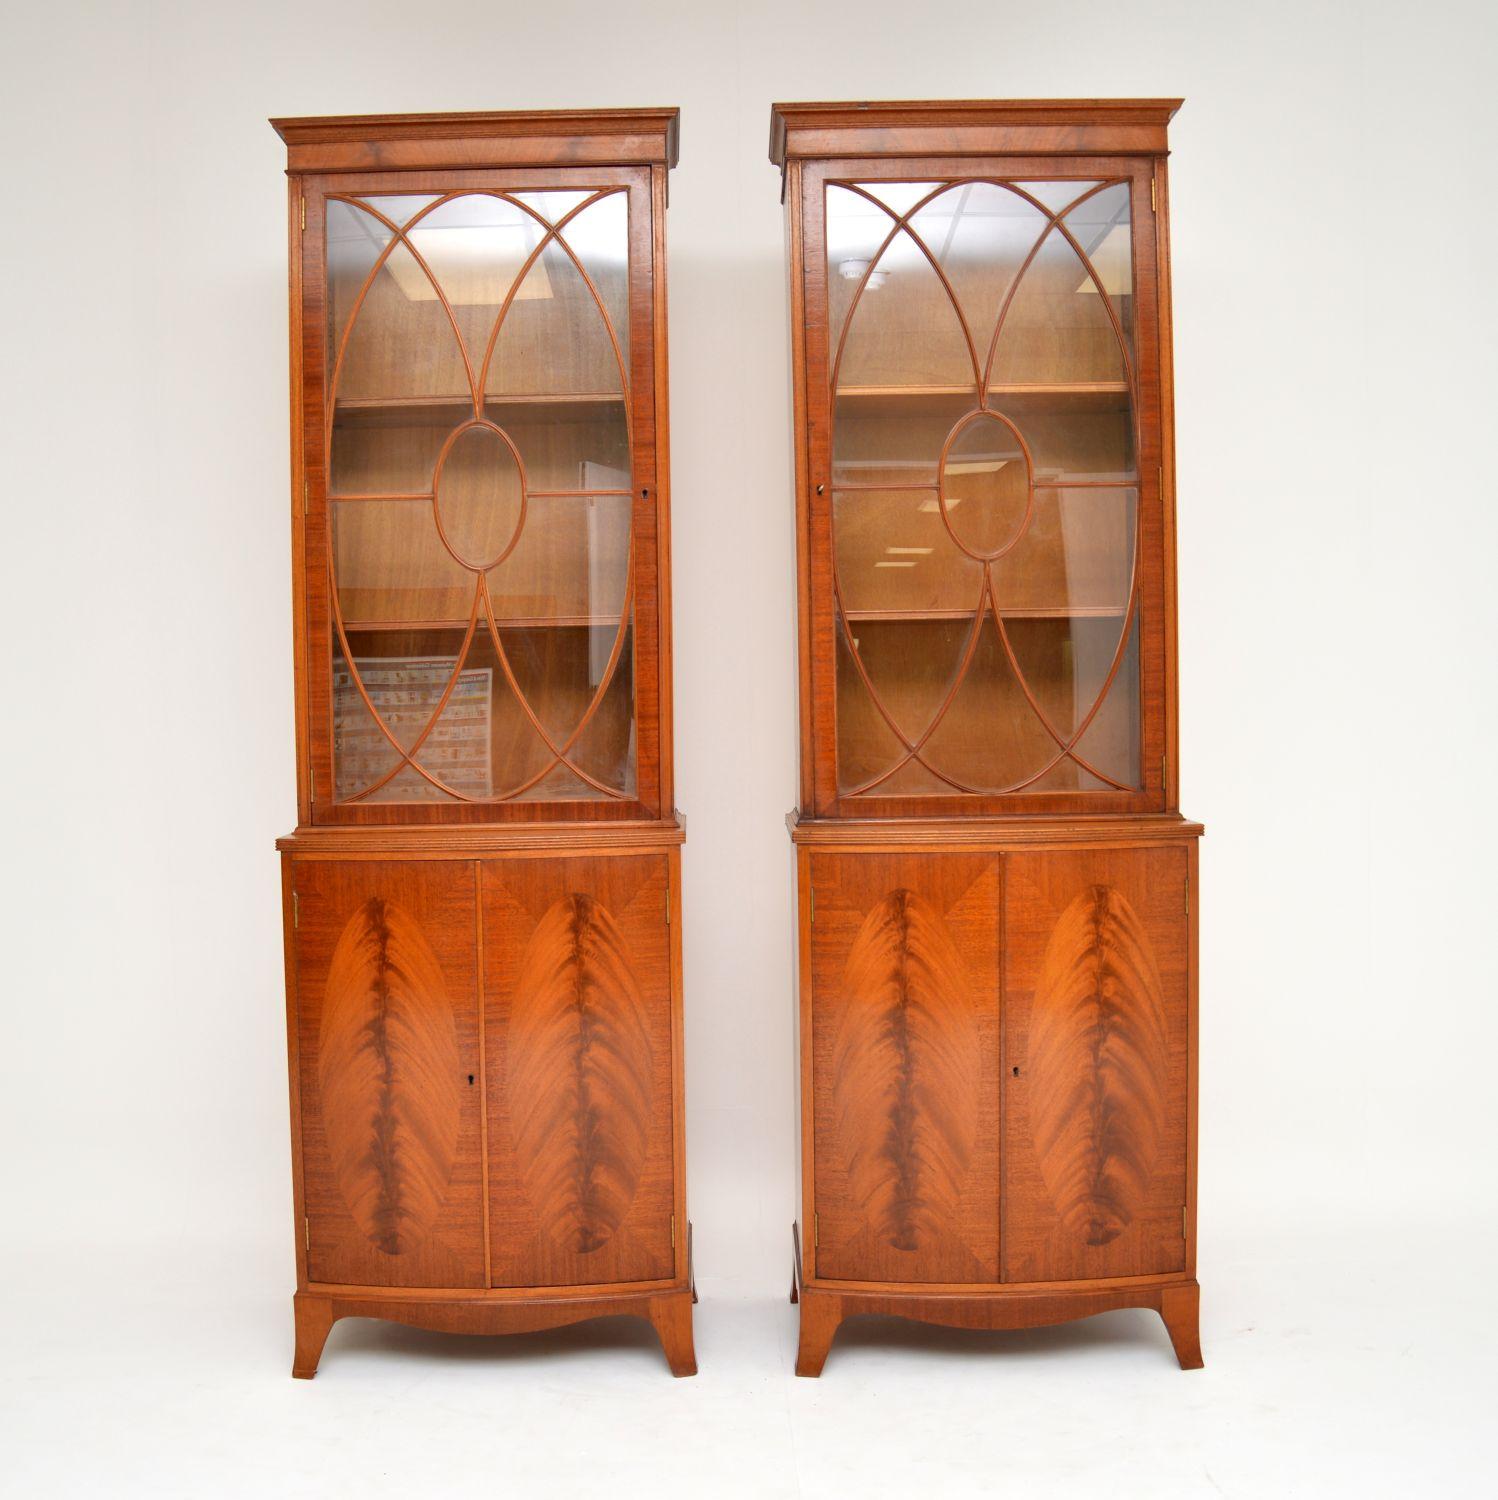 Elegant pair of Sheraton style mahogany two section bookcases with bow fronted base sections and in very good
condition. These were made by Waring & Gillows (the metal label is showing in the images) and I would date them to around the 1950s